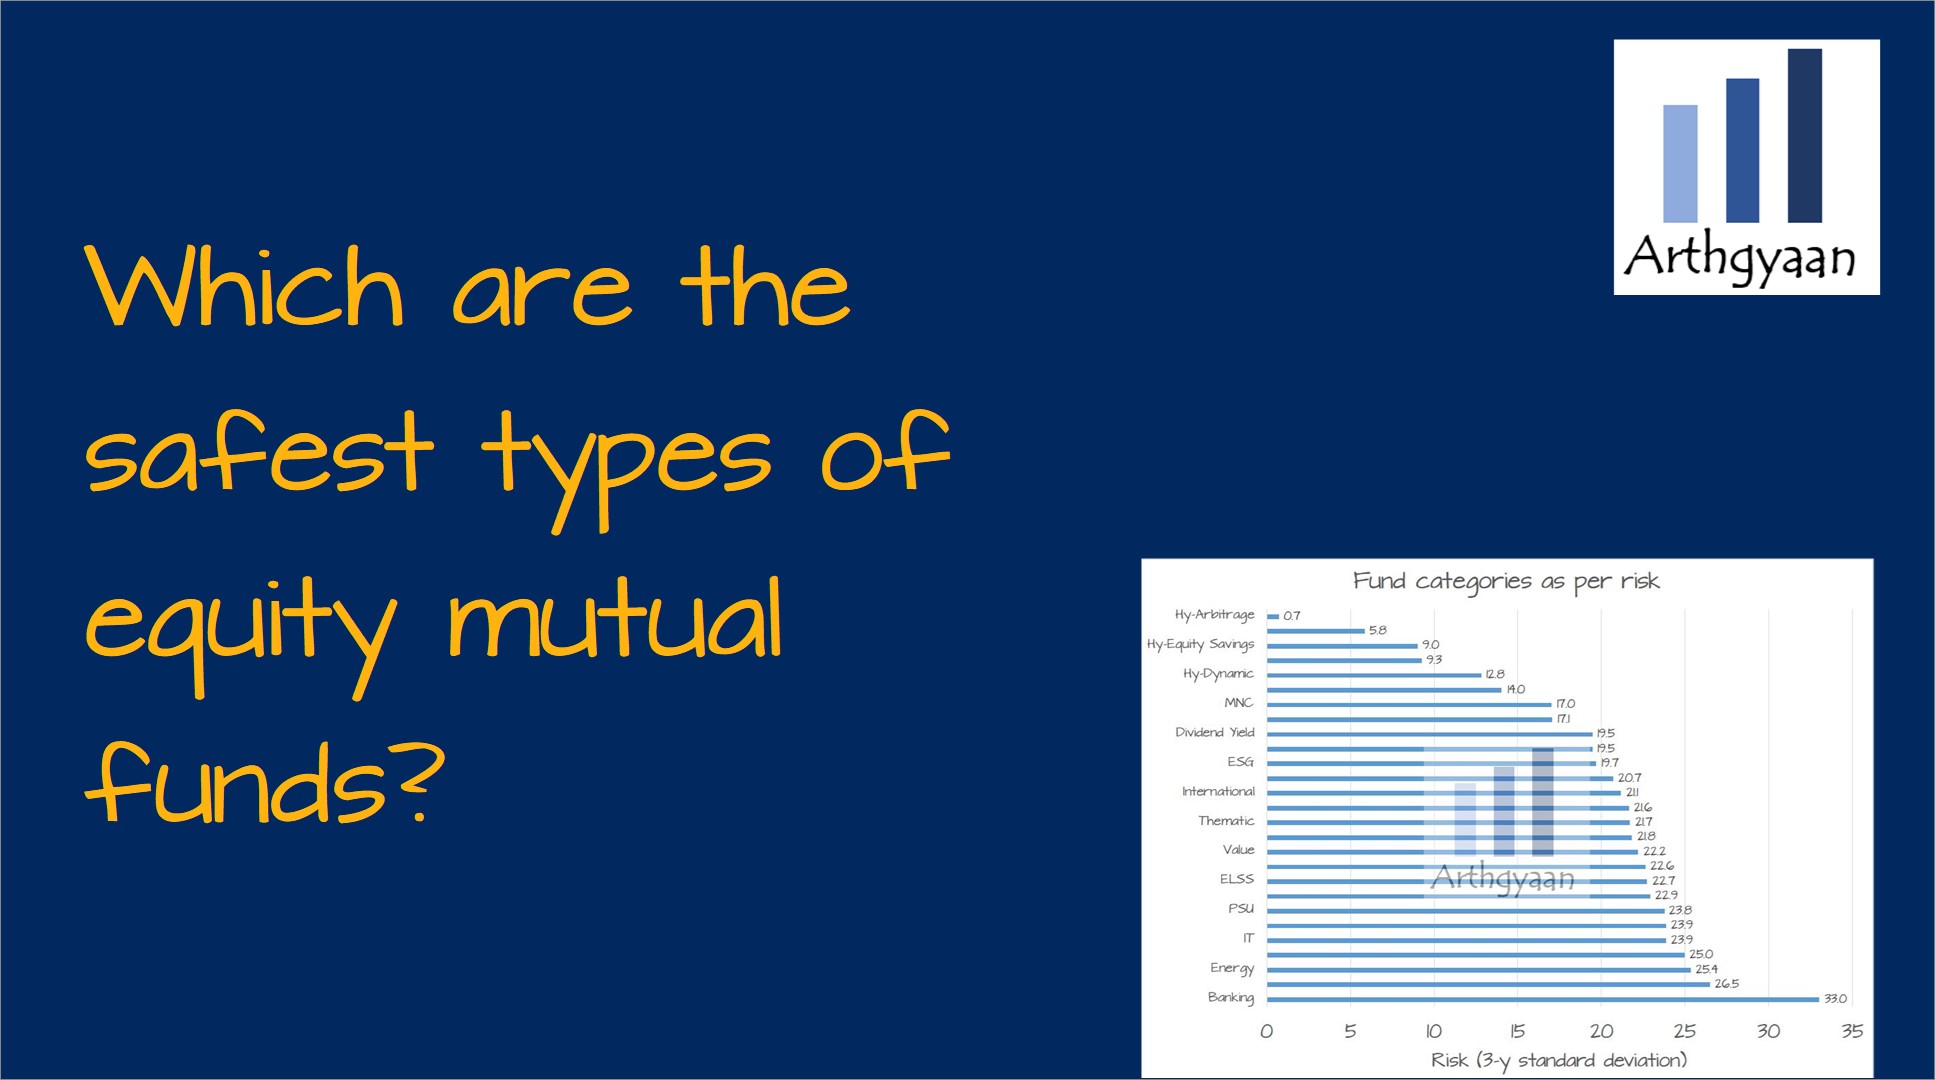 Which are the safest types of equity mutual funds?